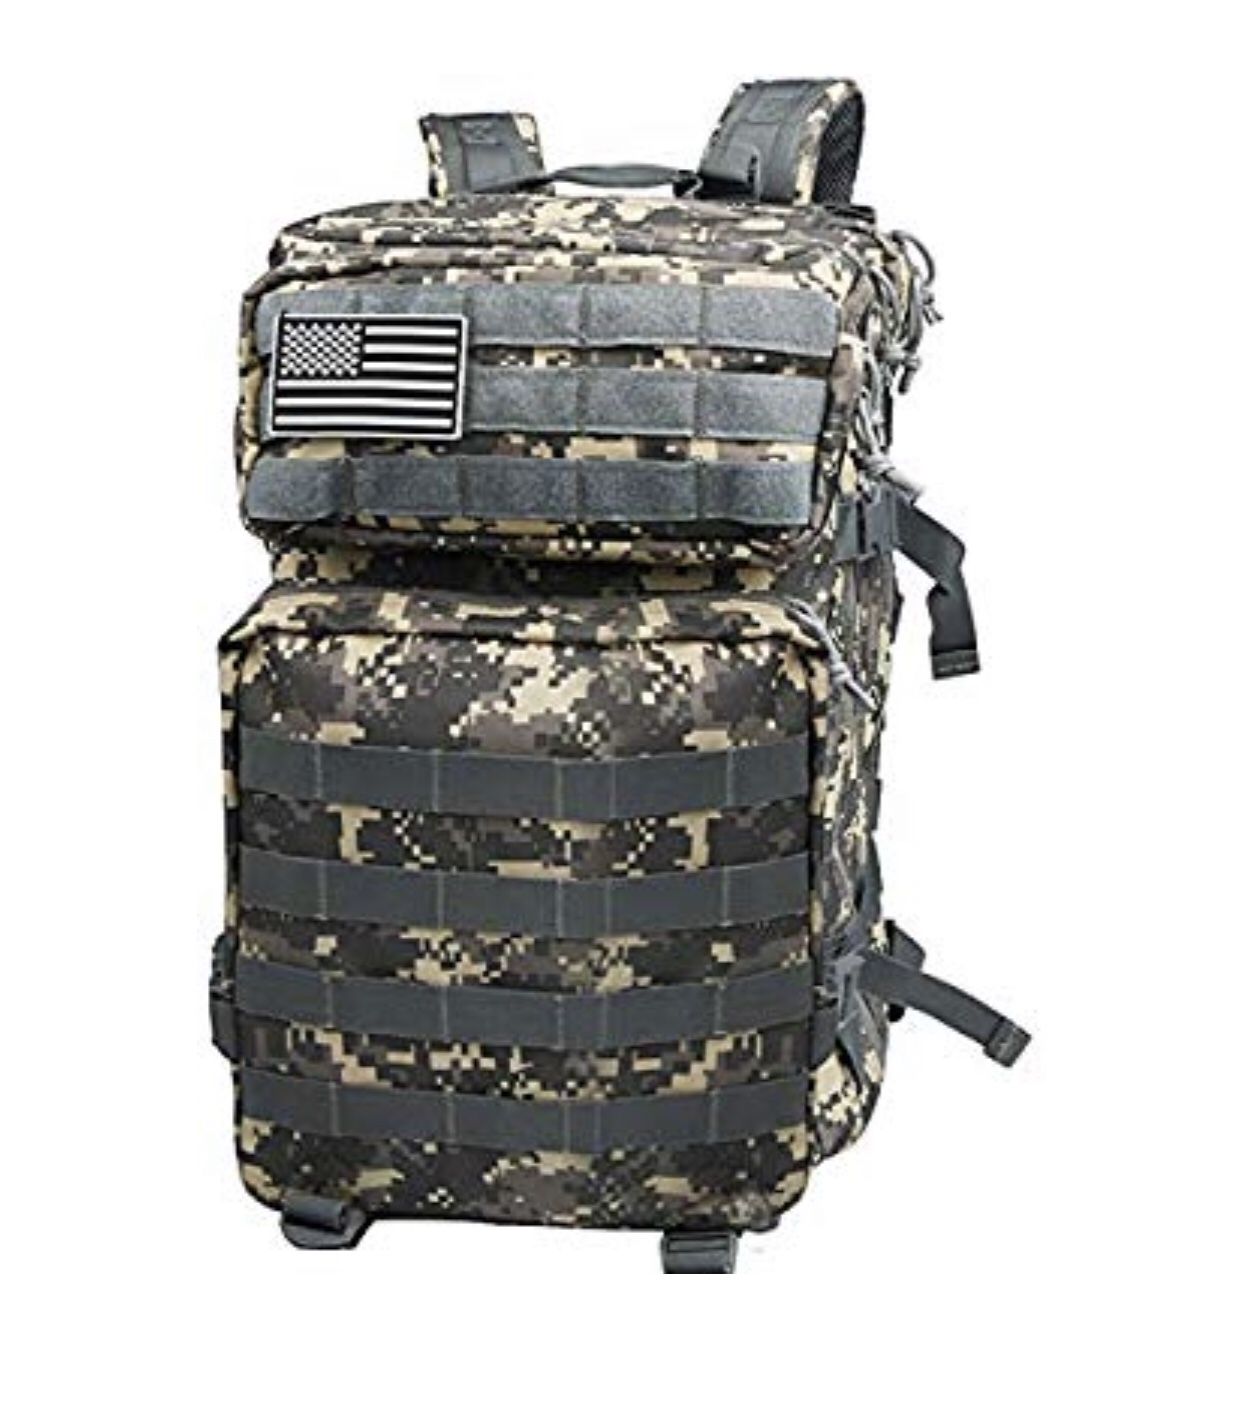 NEW Tactical Backpack 45 Liters Army Backpack Military Backpack Hunting Backpack Bug Out Bag